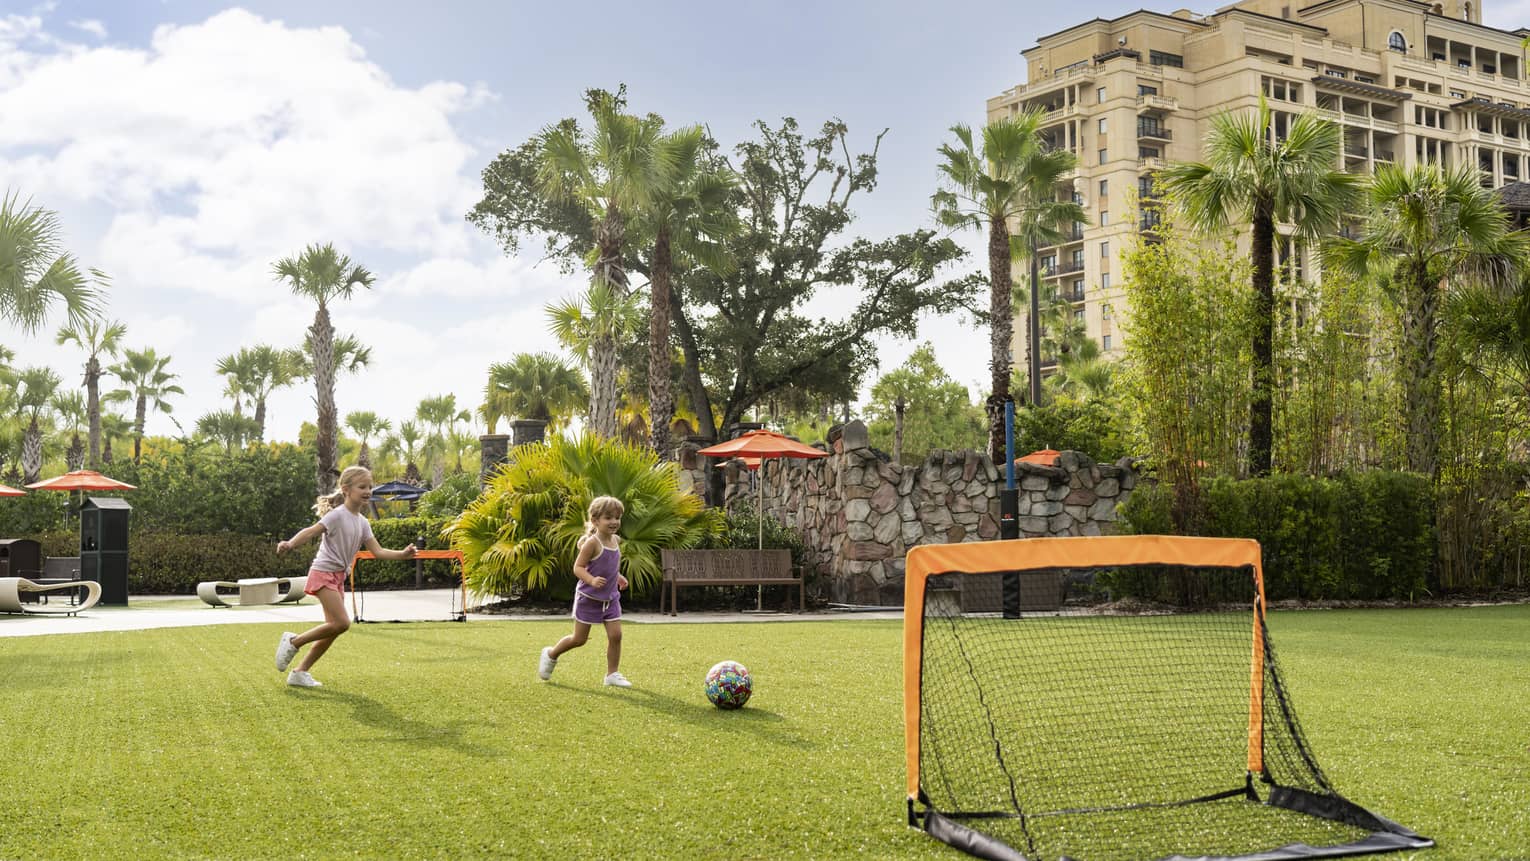 Two young girls playing soccer near palm trees.